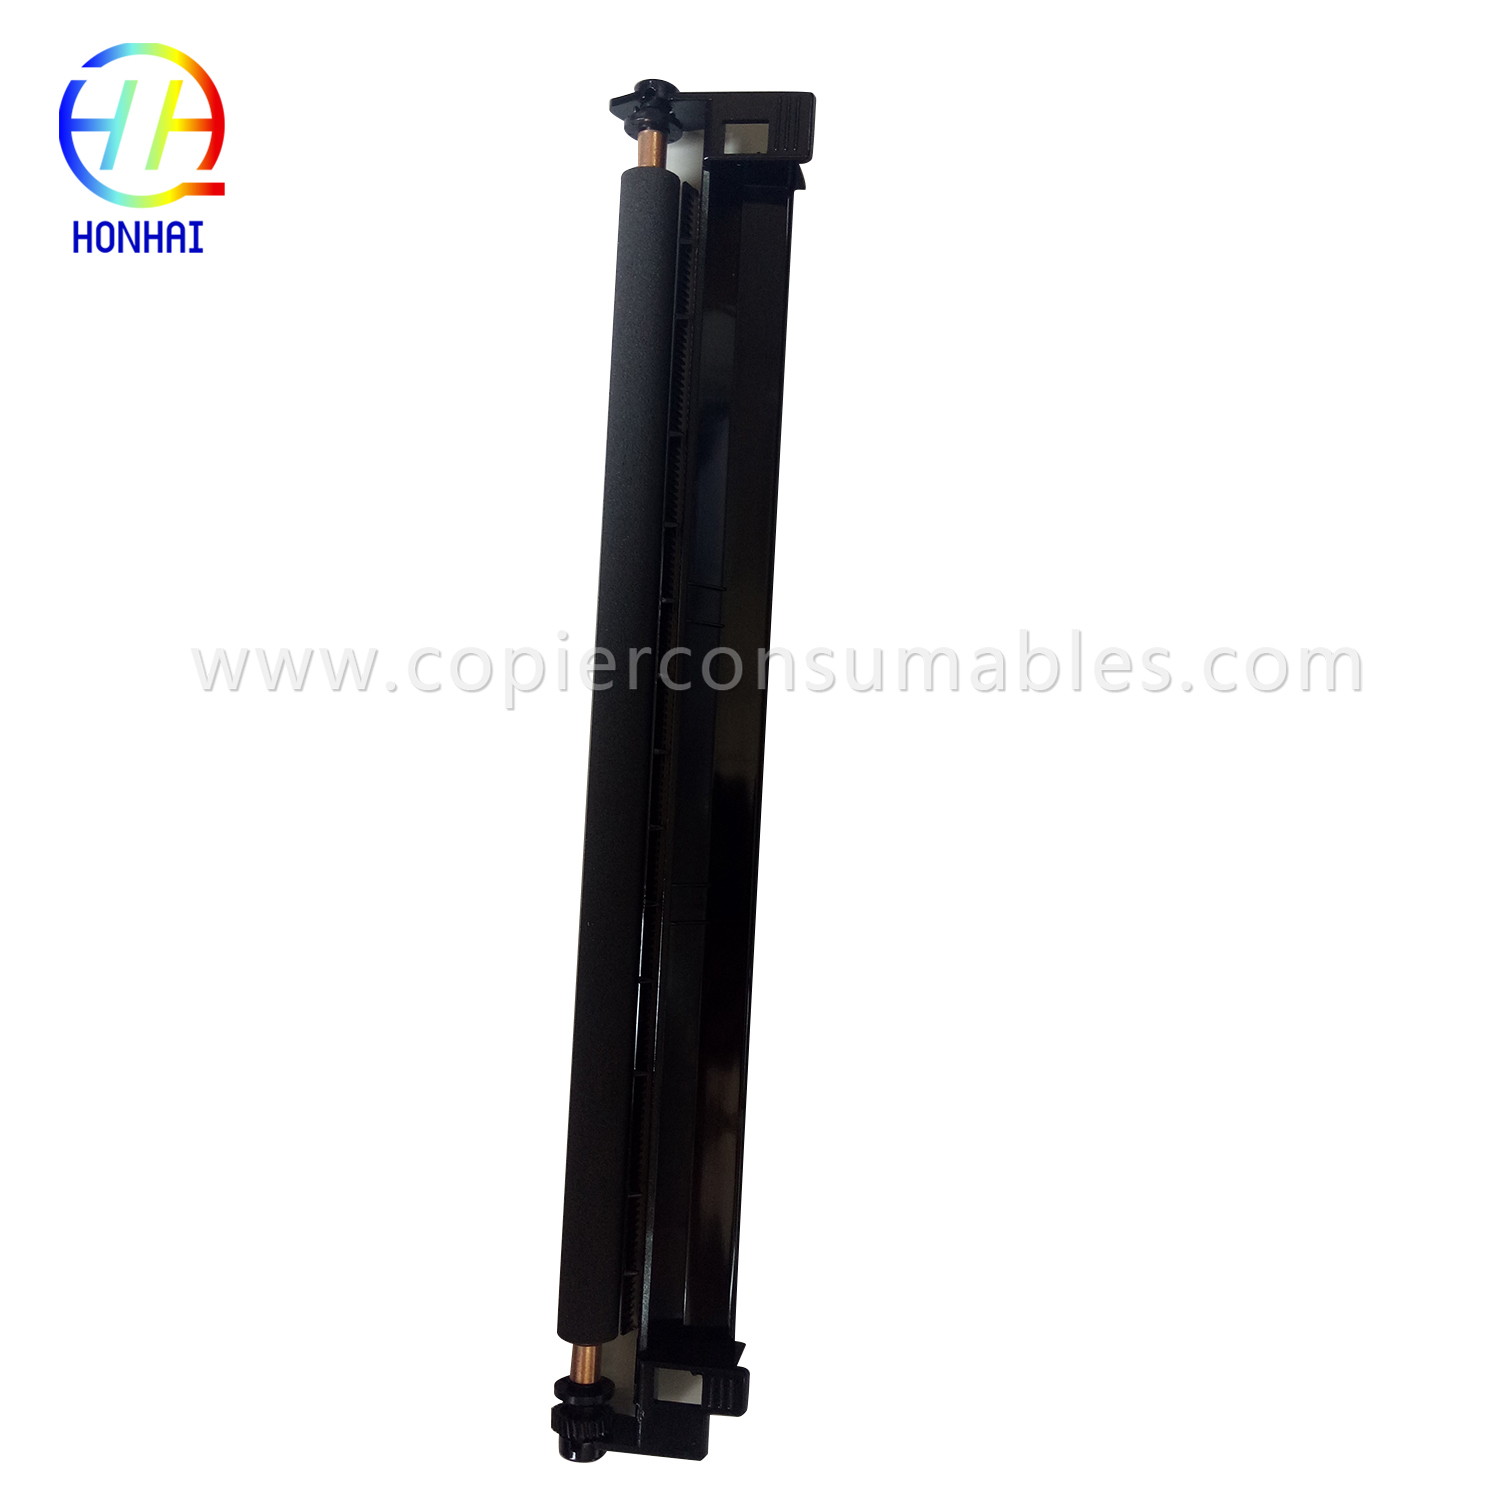 Transfer Roller Assembly for Ricoh Aficio 1022 1027 2022 2027 220 270 3025 3030 MP2510 2550 2852 B2093831